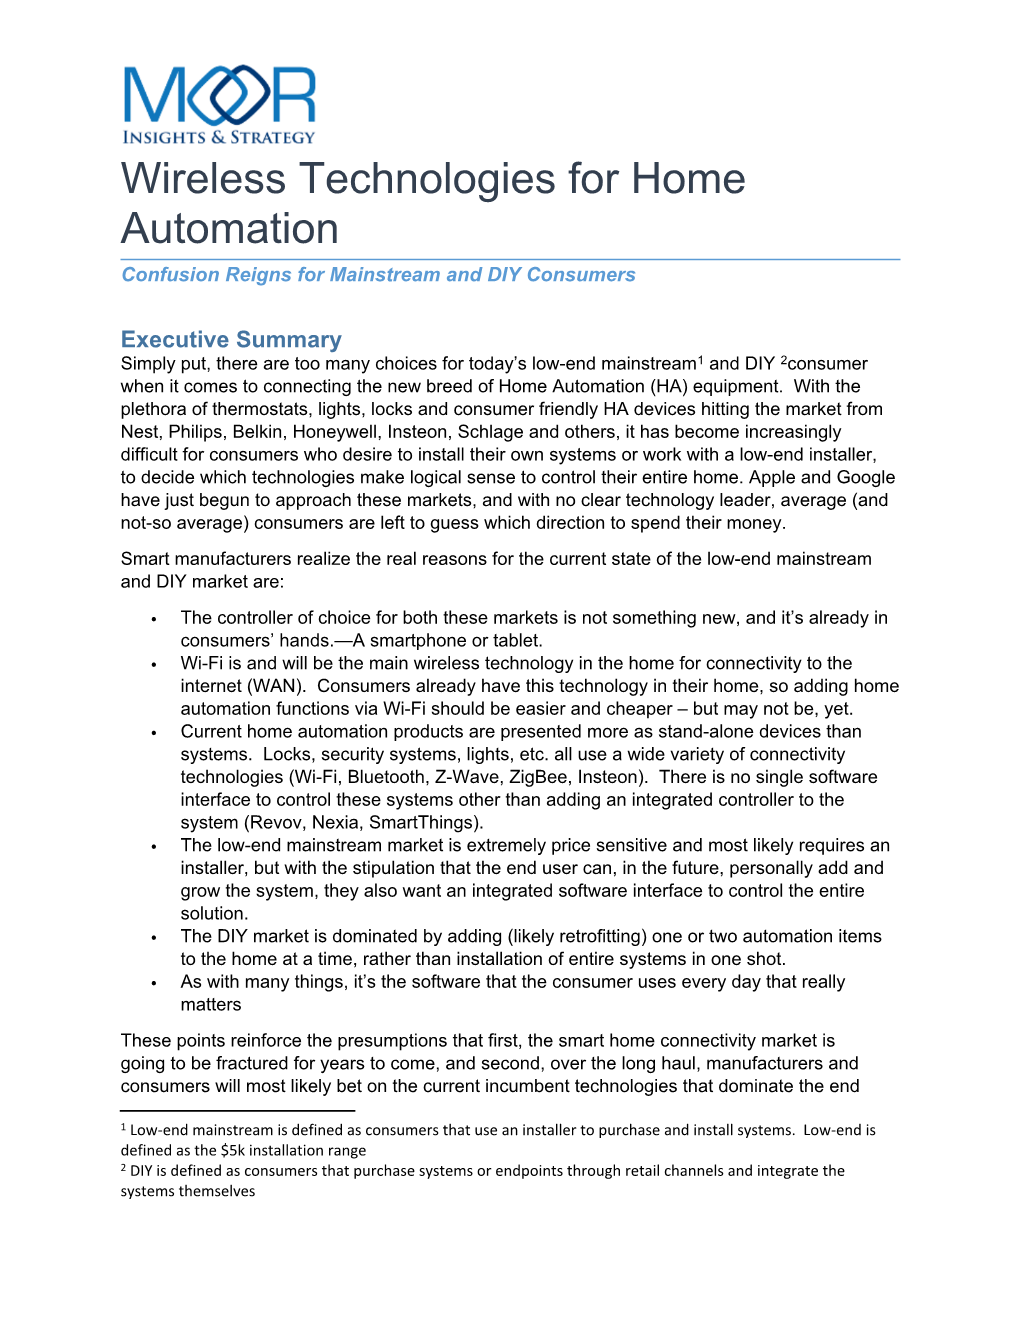 Wireless Technologies for Home Automation